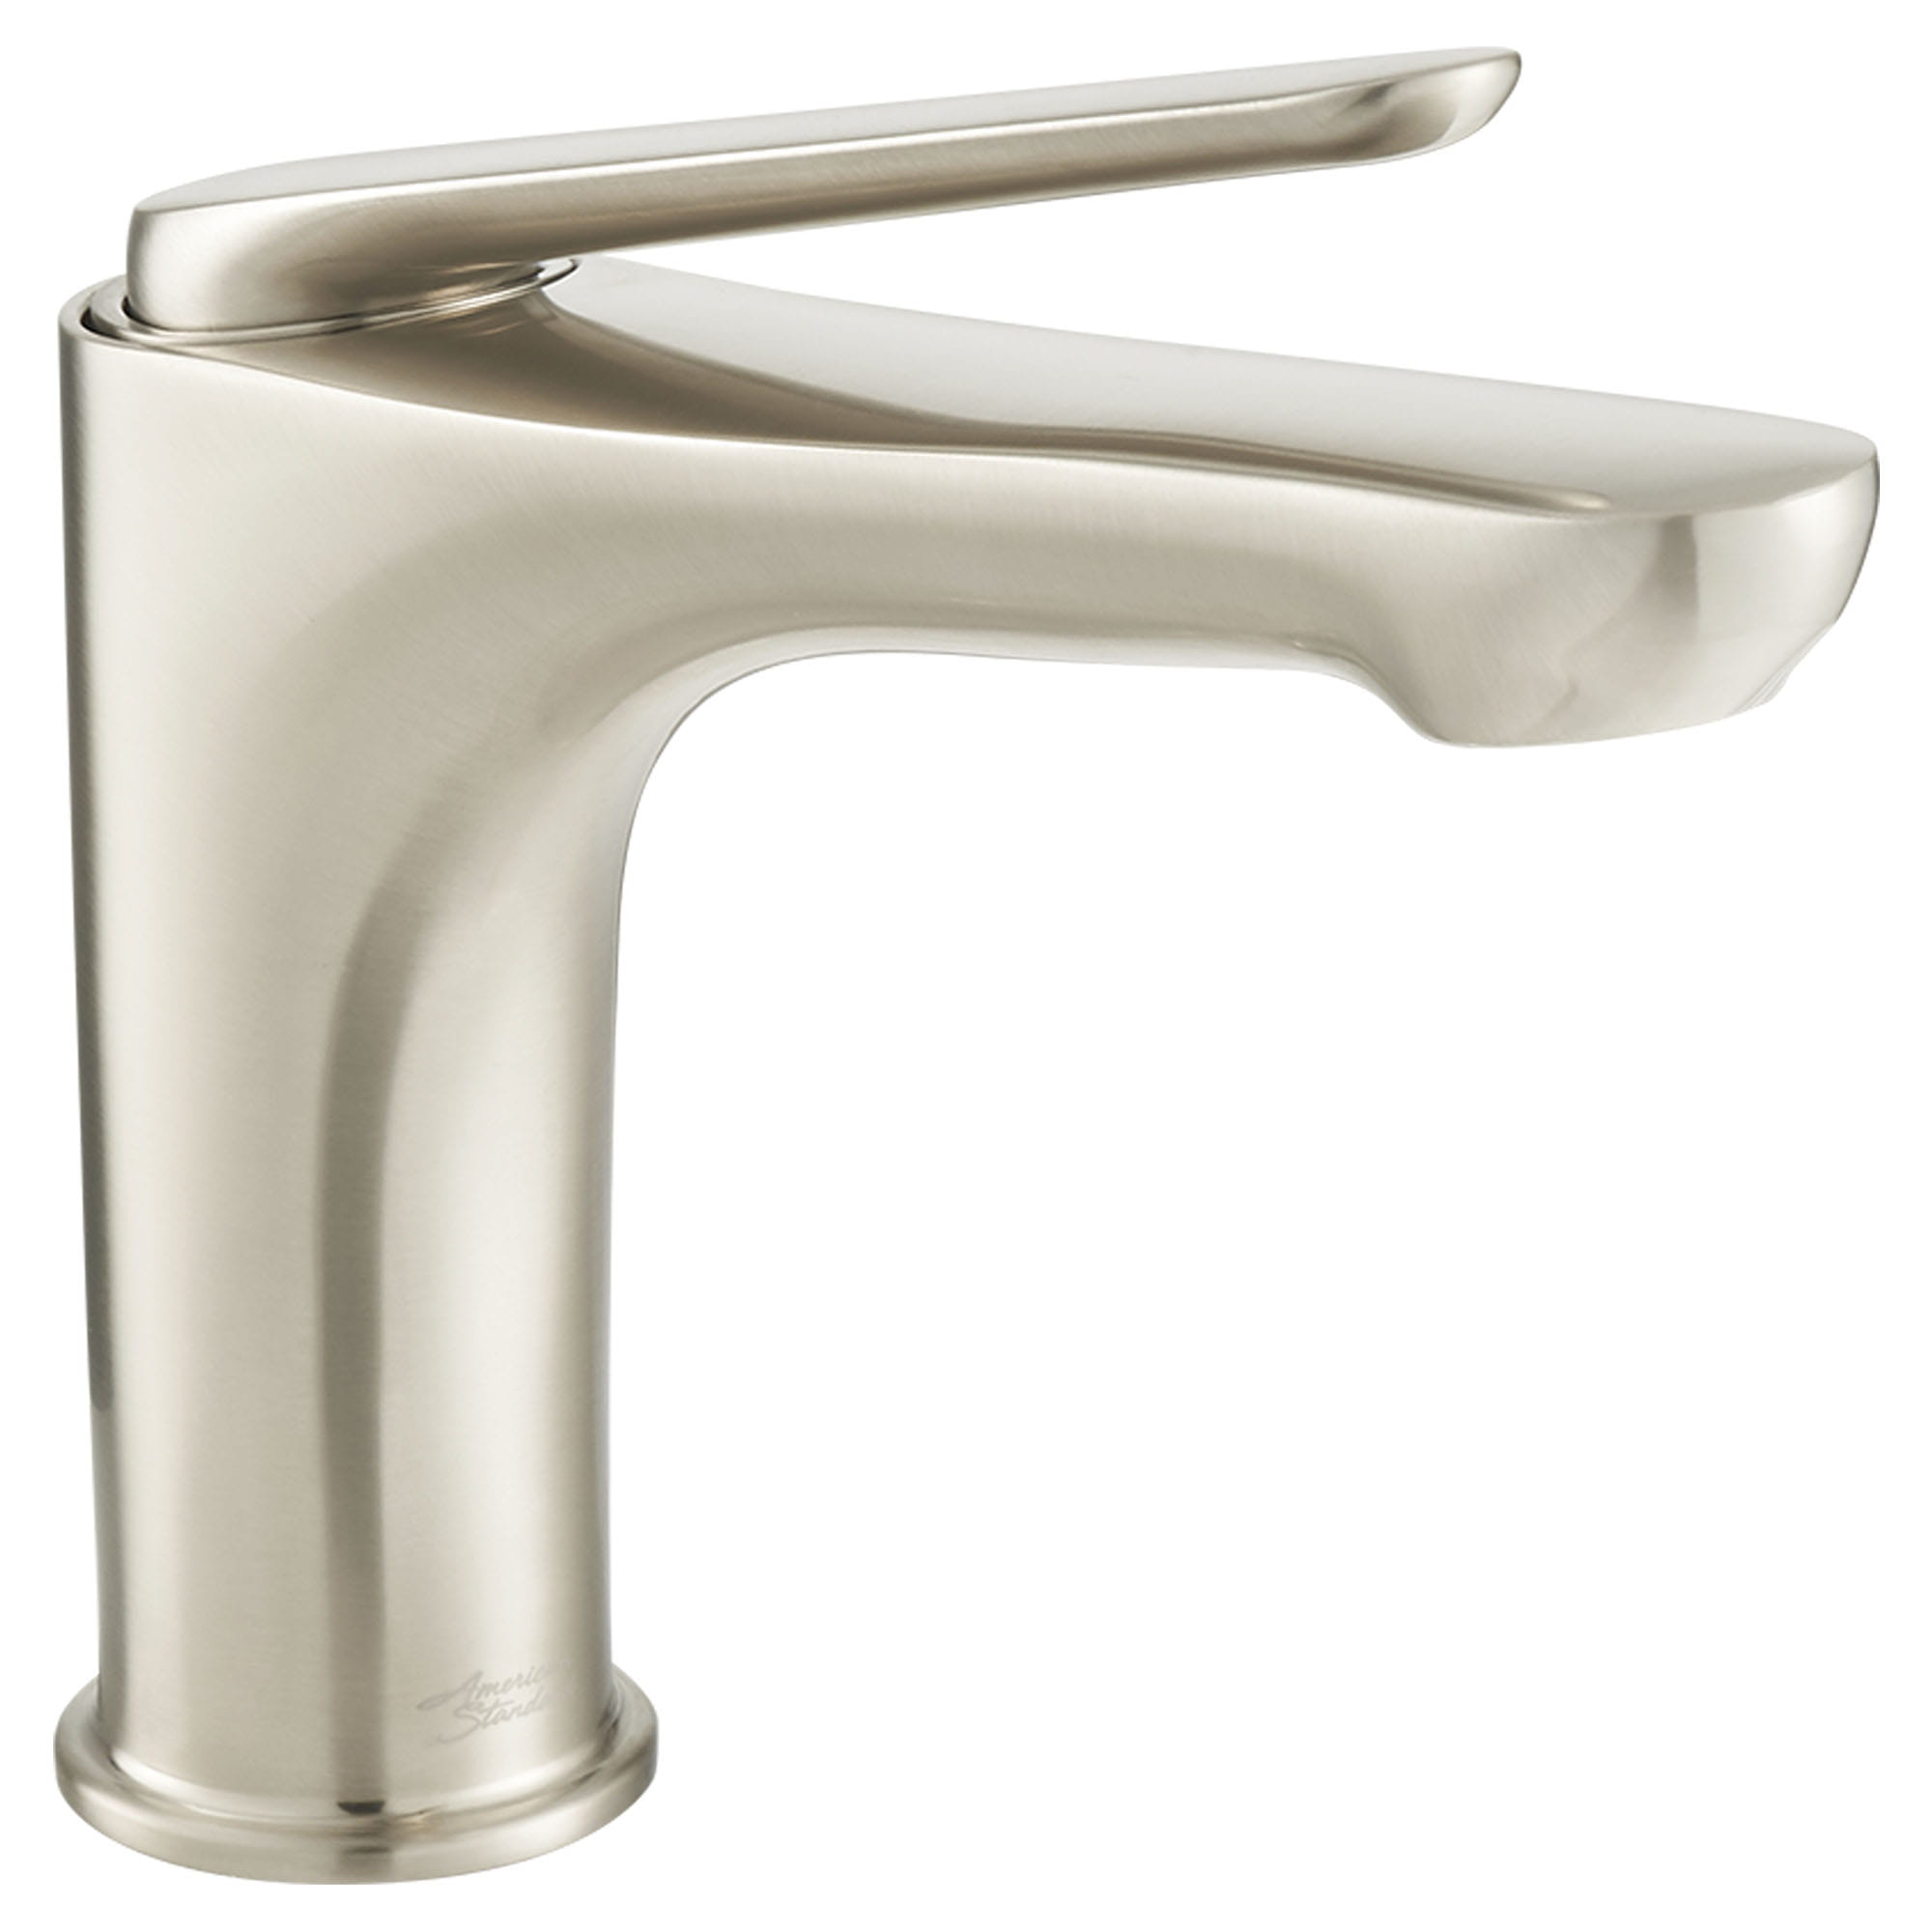 Studio S Single Hole Single Handle Bathroom Faucet 12 gpm  45 L min With Lever Handle   BRUSHED NICKEL